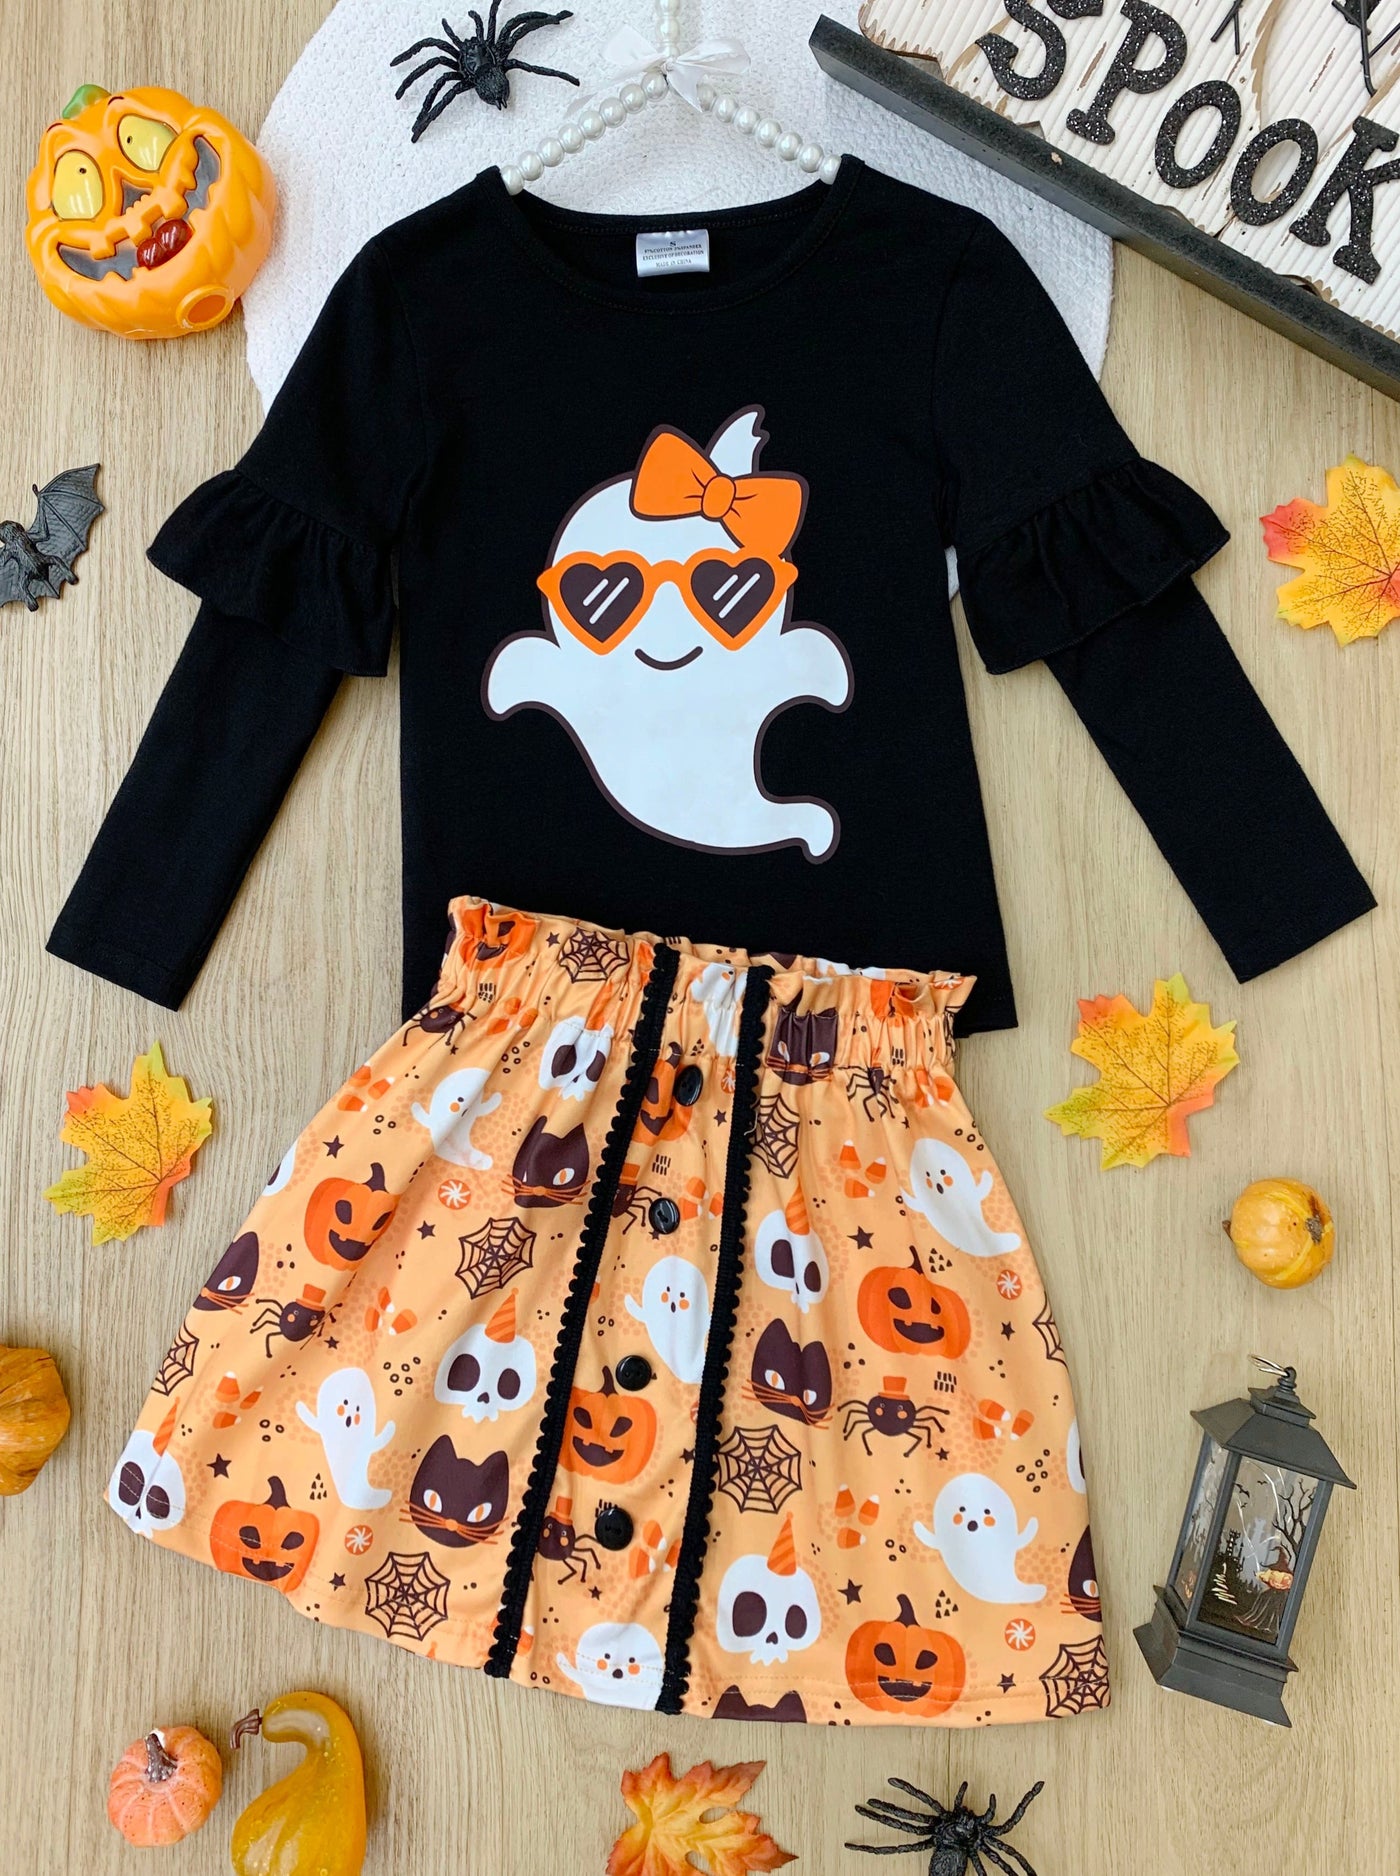 Boo, Felicia Ghost Top And Halloween Skirt Set